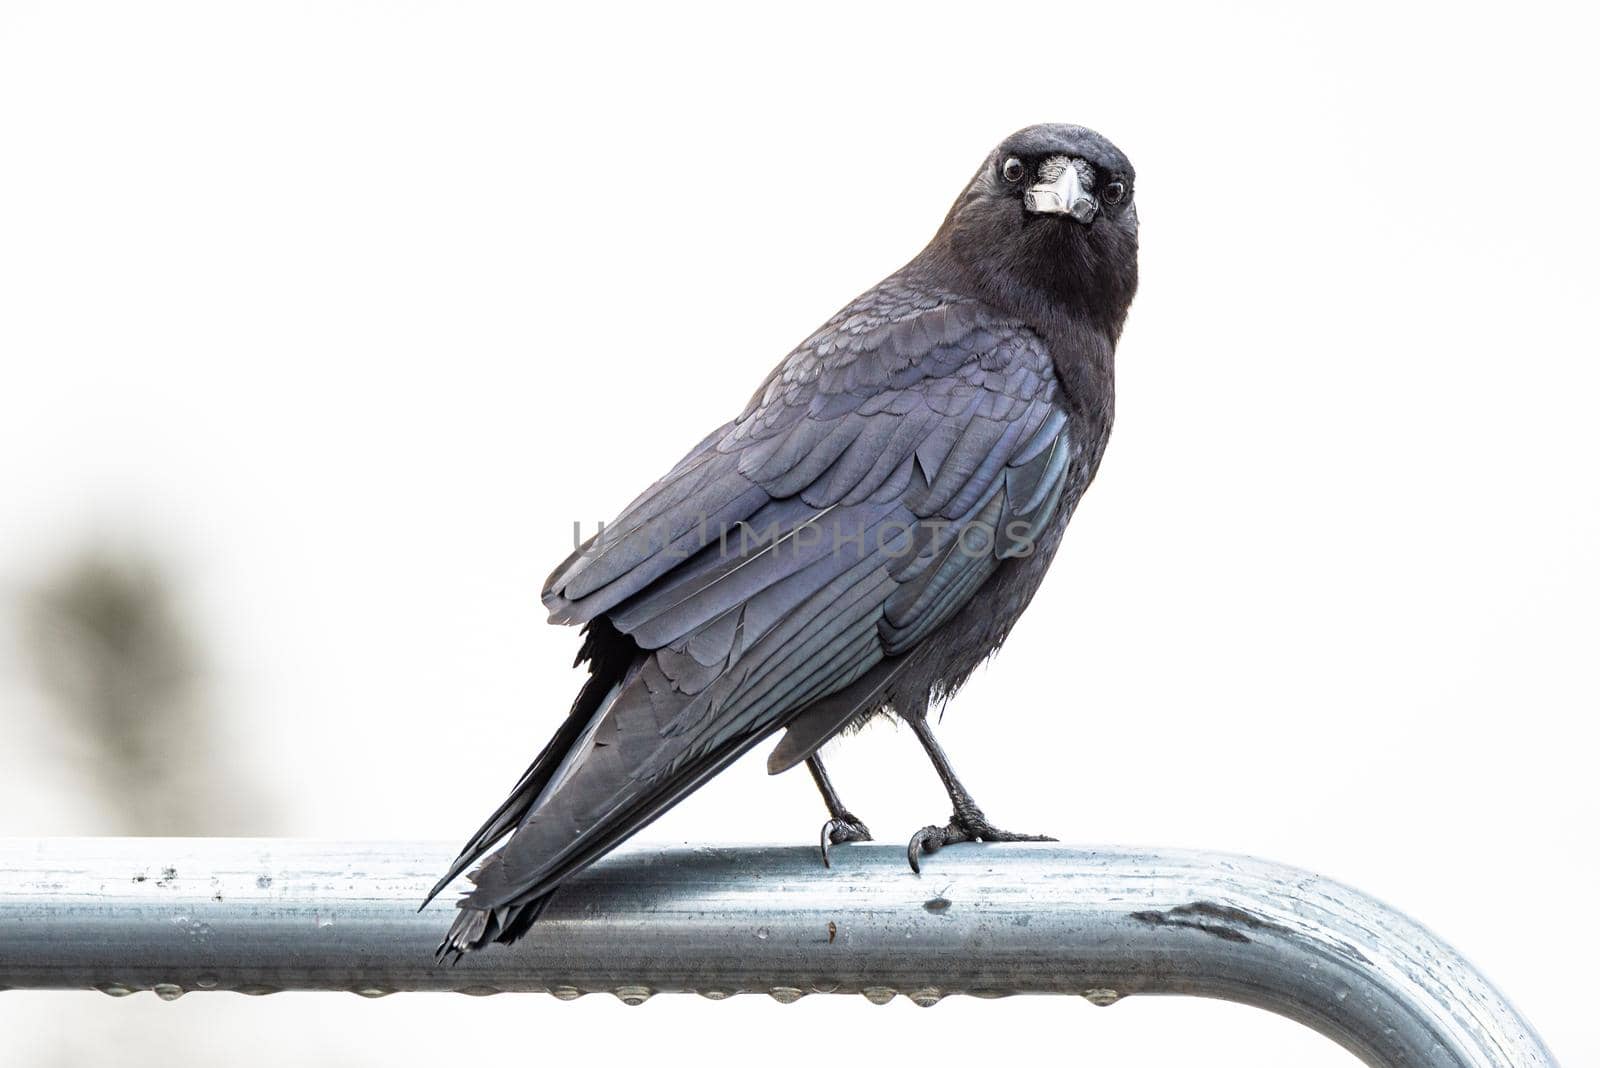 Closeup portrait of common raven looking at camera on white background by Pendleton